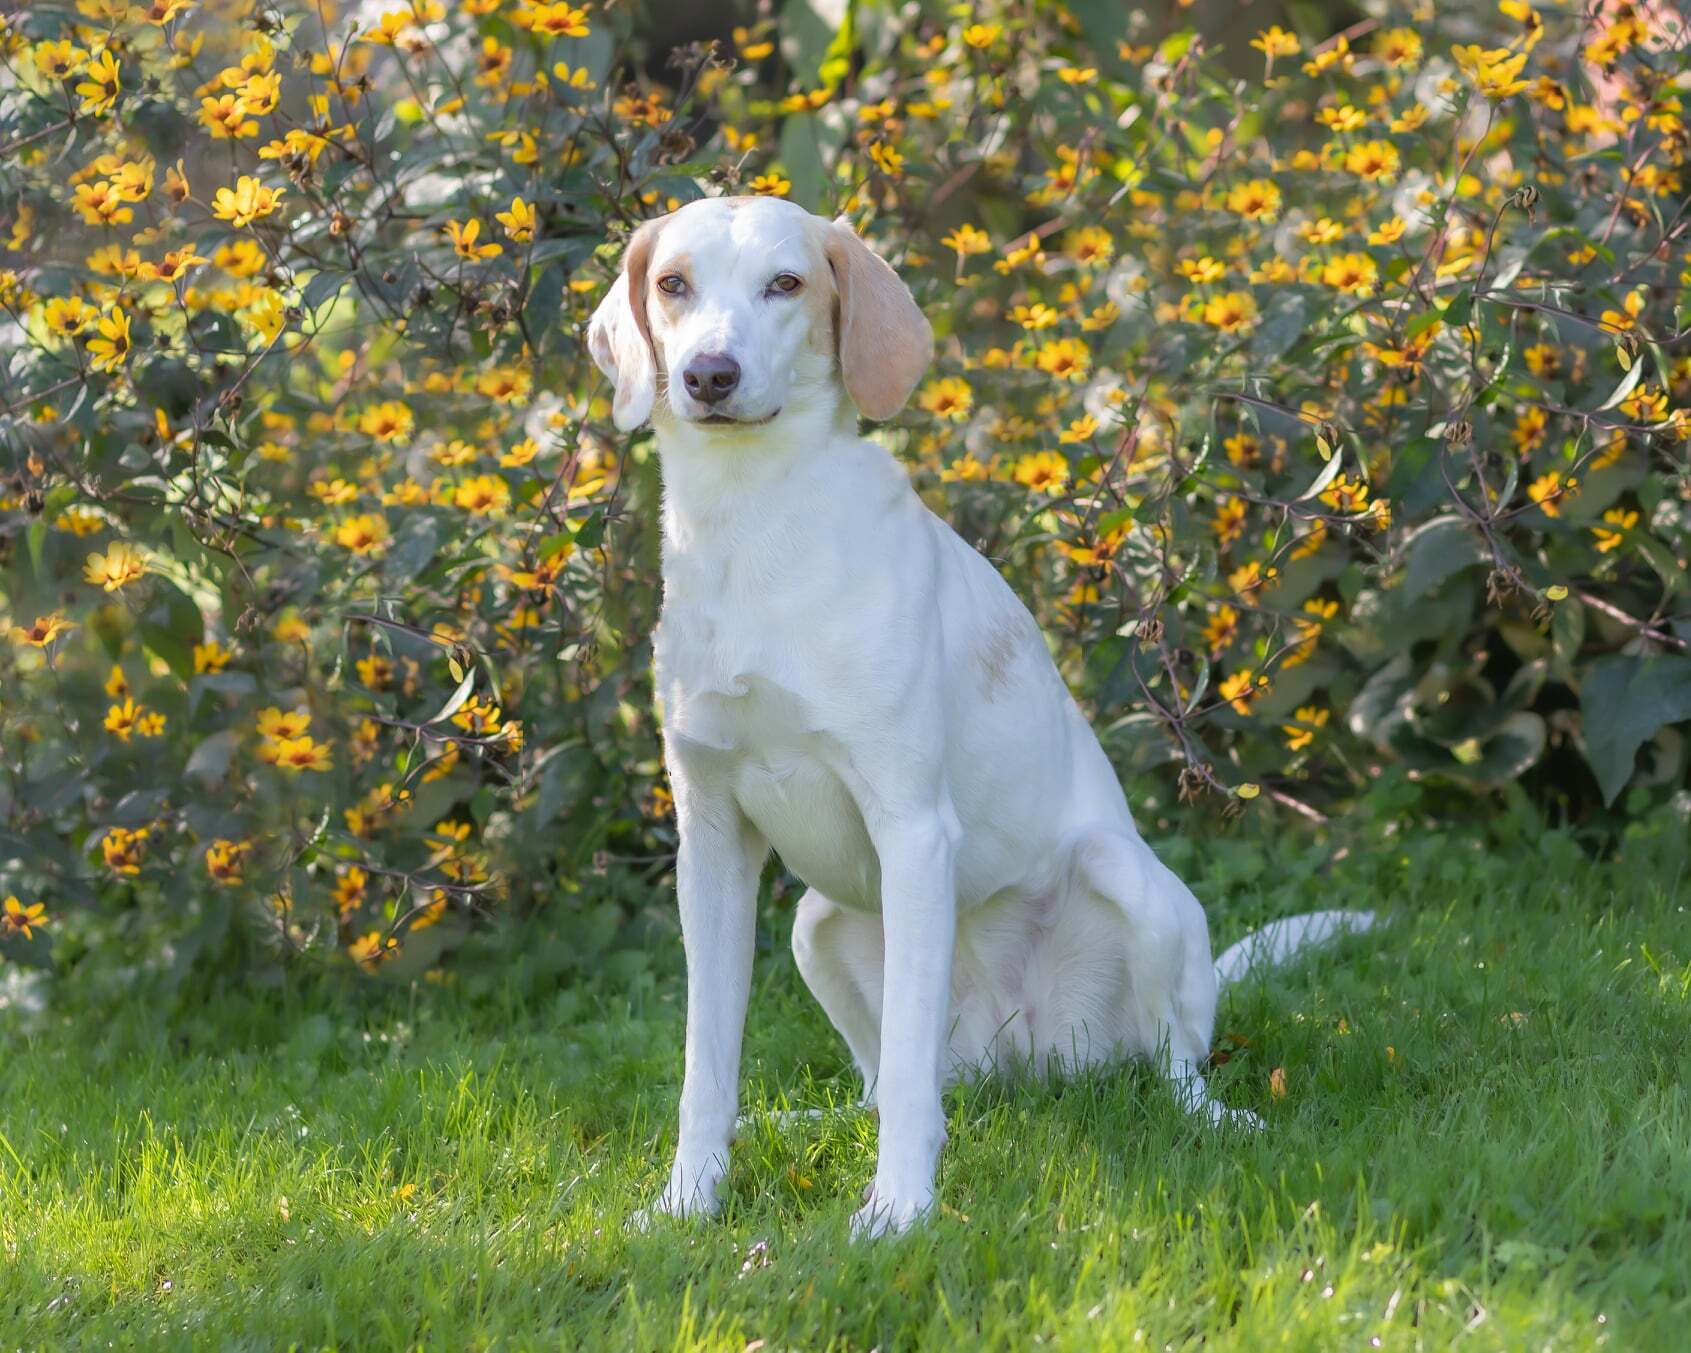 Tilly - Foster to Adopt, an adoptable Foxhound in North Bay, ON, P1B 8G2 | Photo Image 12